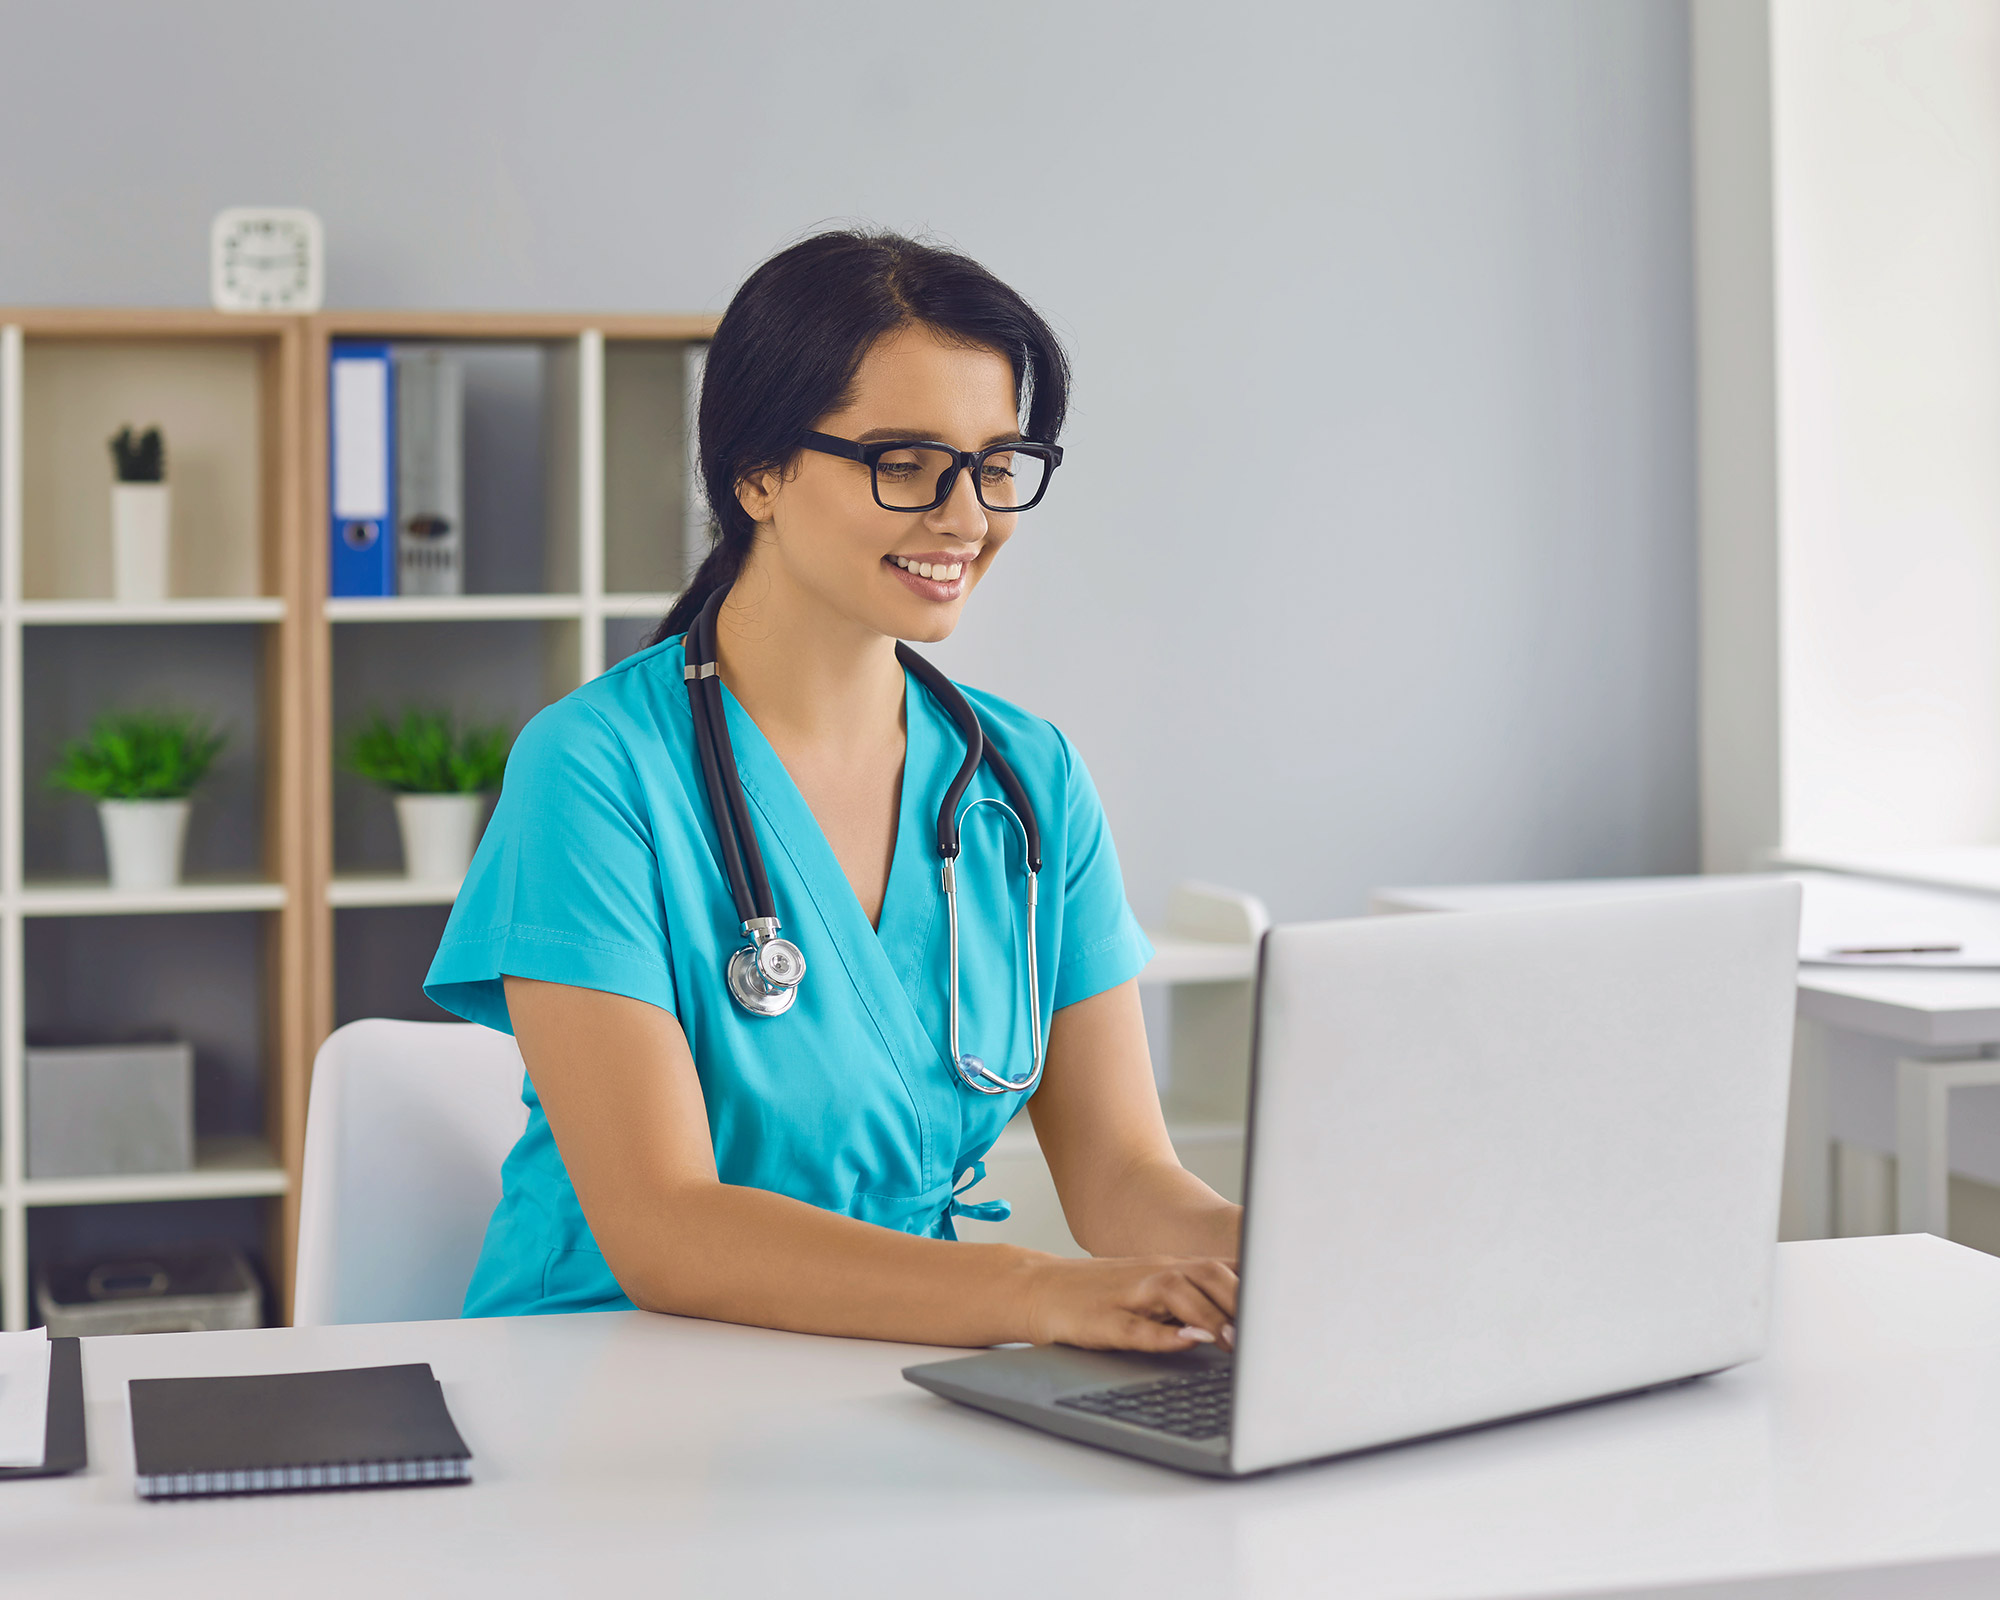 Digital Presence An Individual HealthCare Worker: A Necessity For the Future